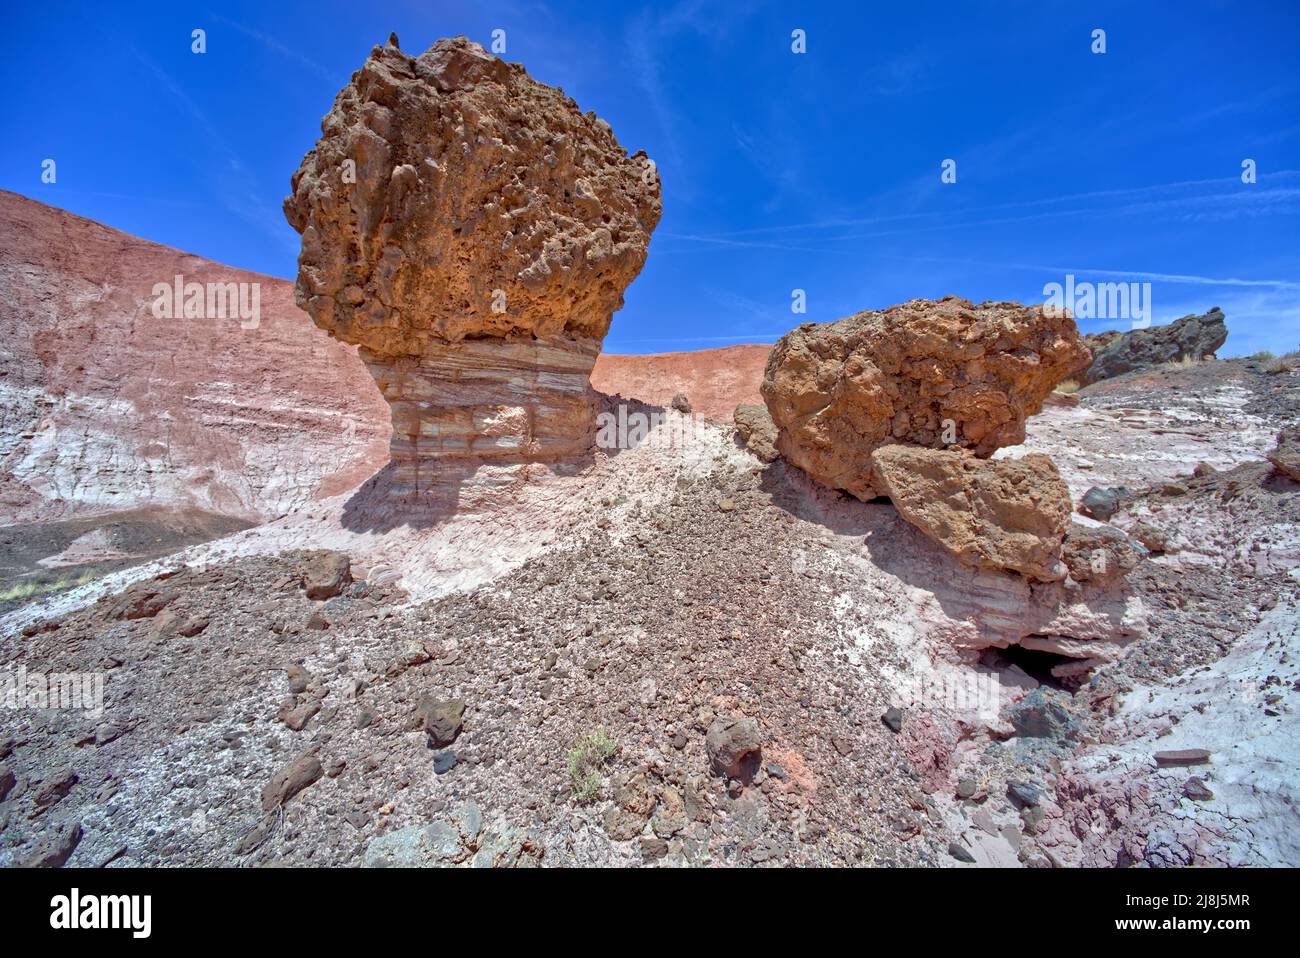 Balanced boulder below the cliffs of Pintado Point in Petrified Forest National Park Arizona. Stock Photo